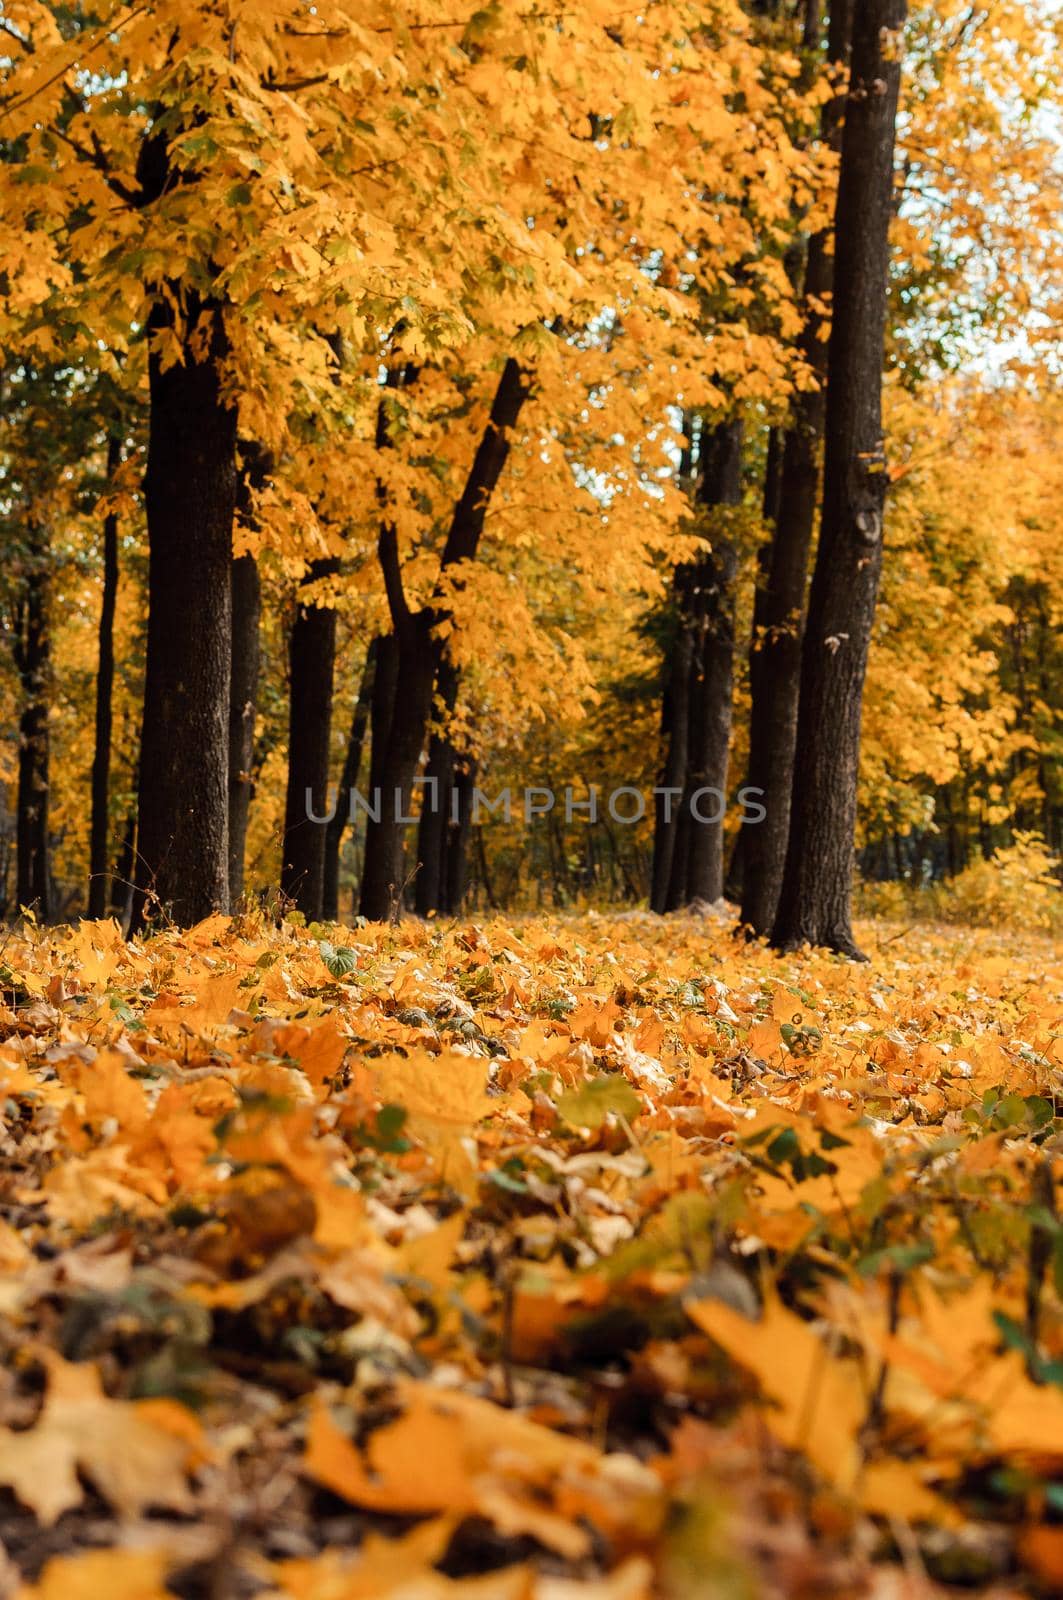 Autumn sunny landscape. Road to yellow forest. Autumn park of trees and fallen autumn leaves on the ground in the park on a sunny October day.template for design. by Alla_Morozova93